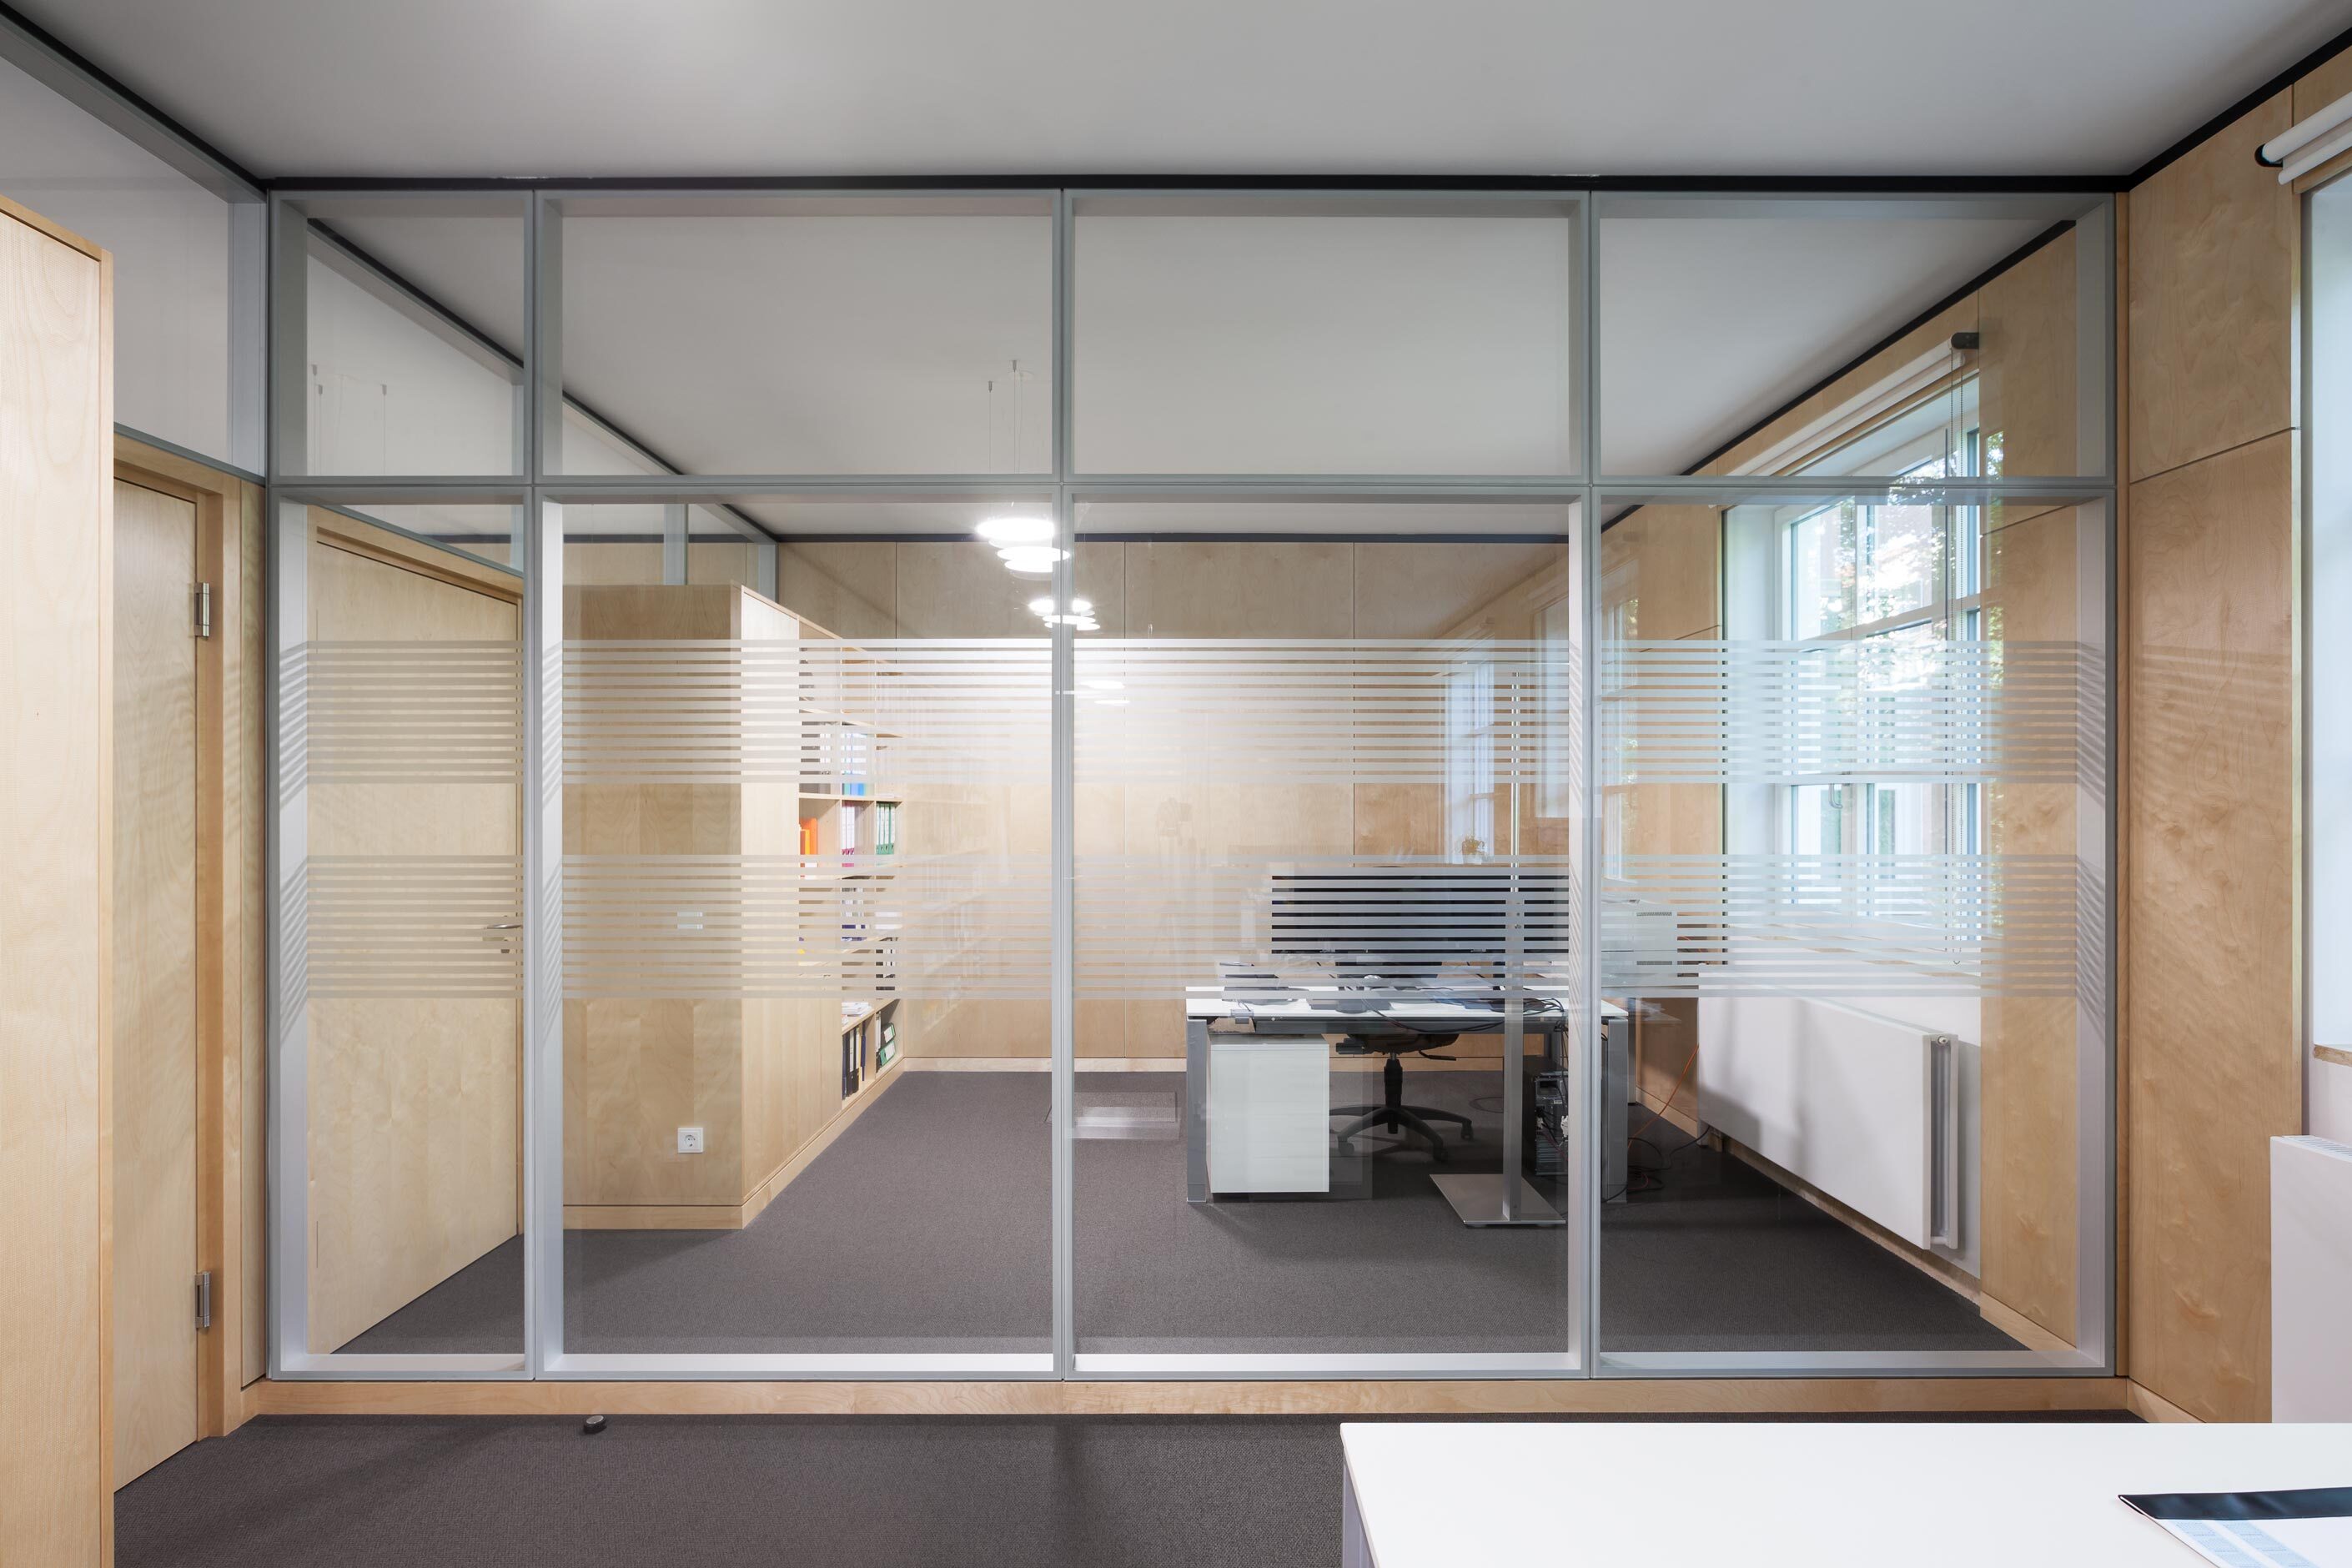 C.H. Beck Verlag Munich │ coustically-effective wall panelling │ flush double glazing